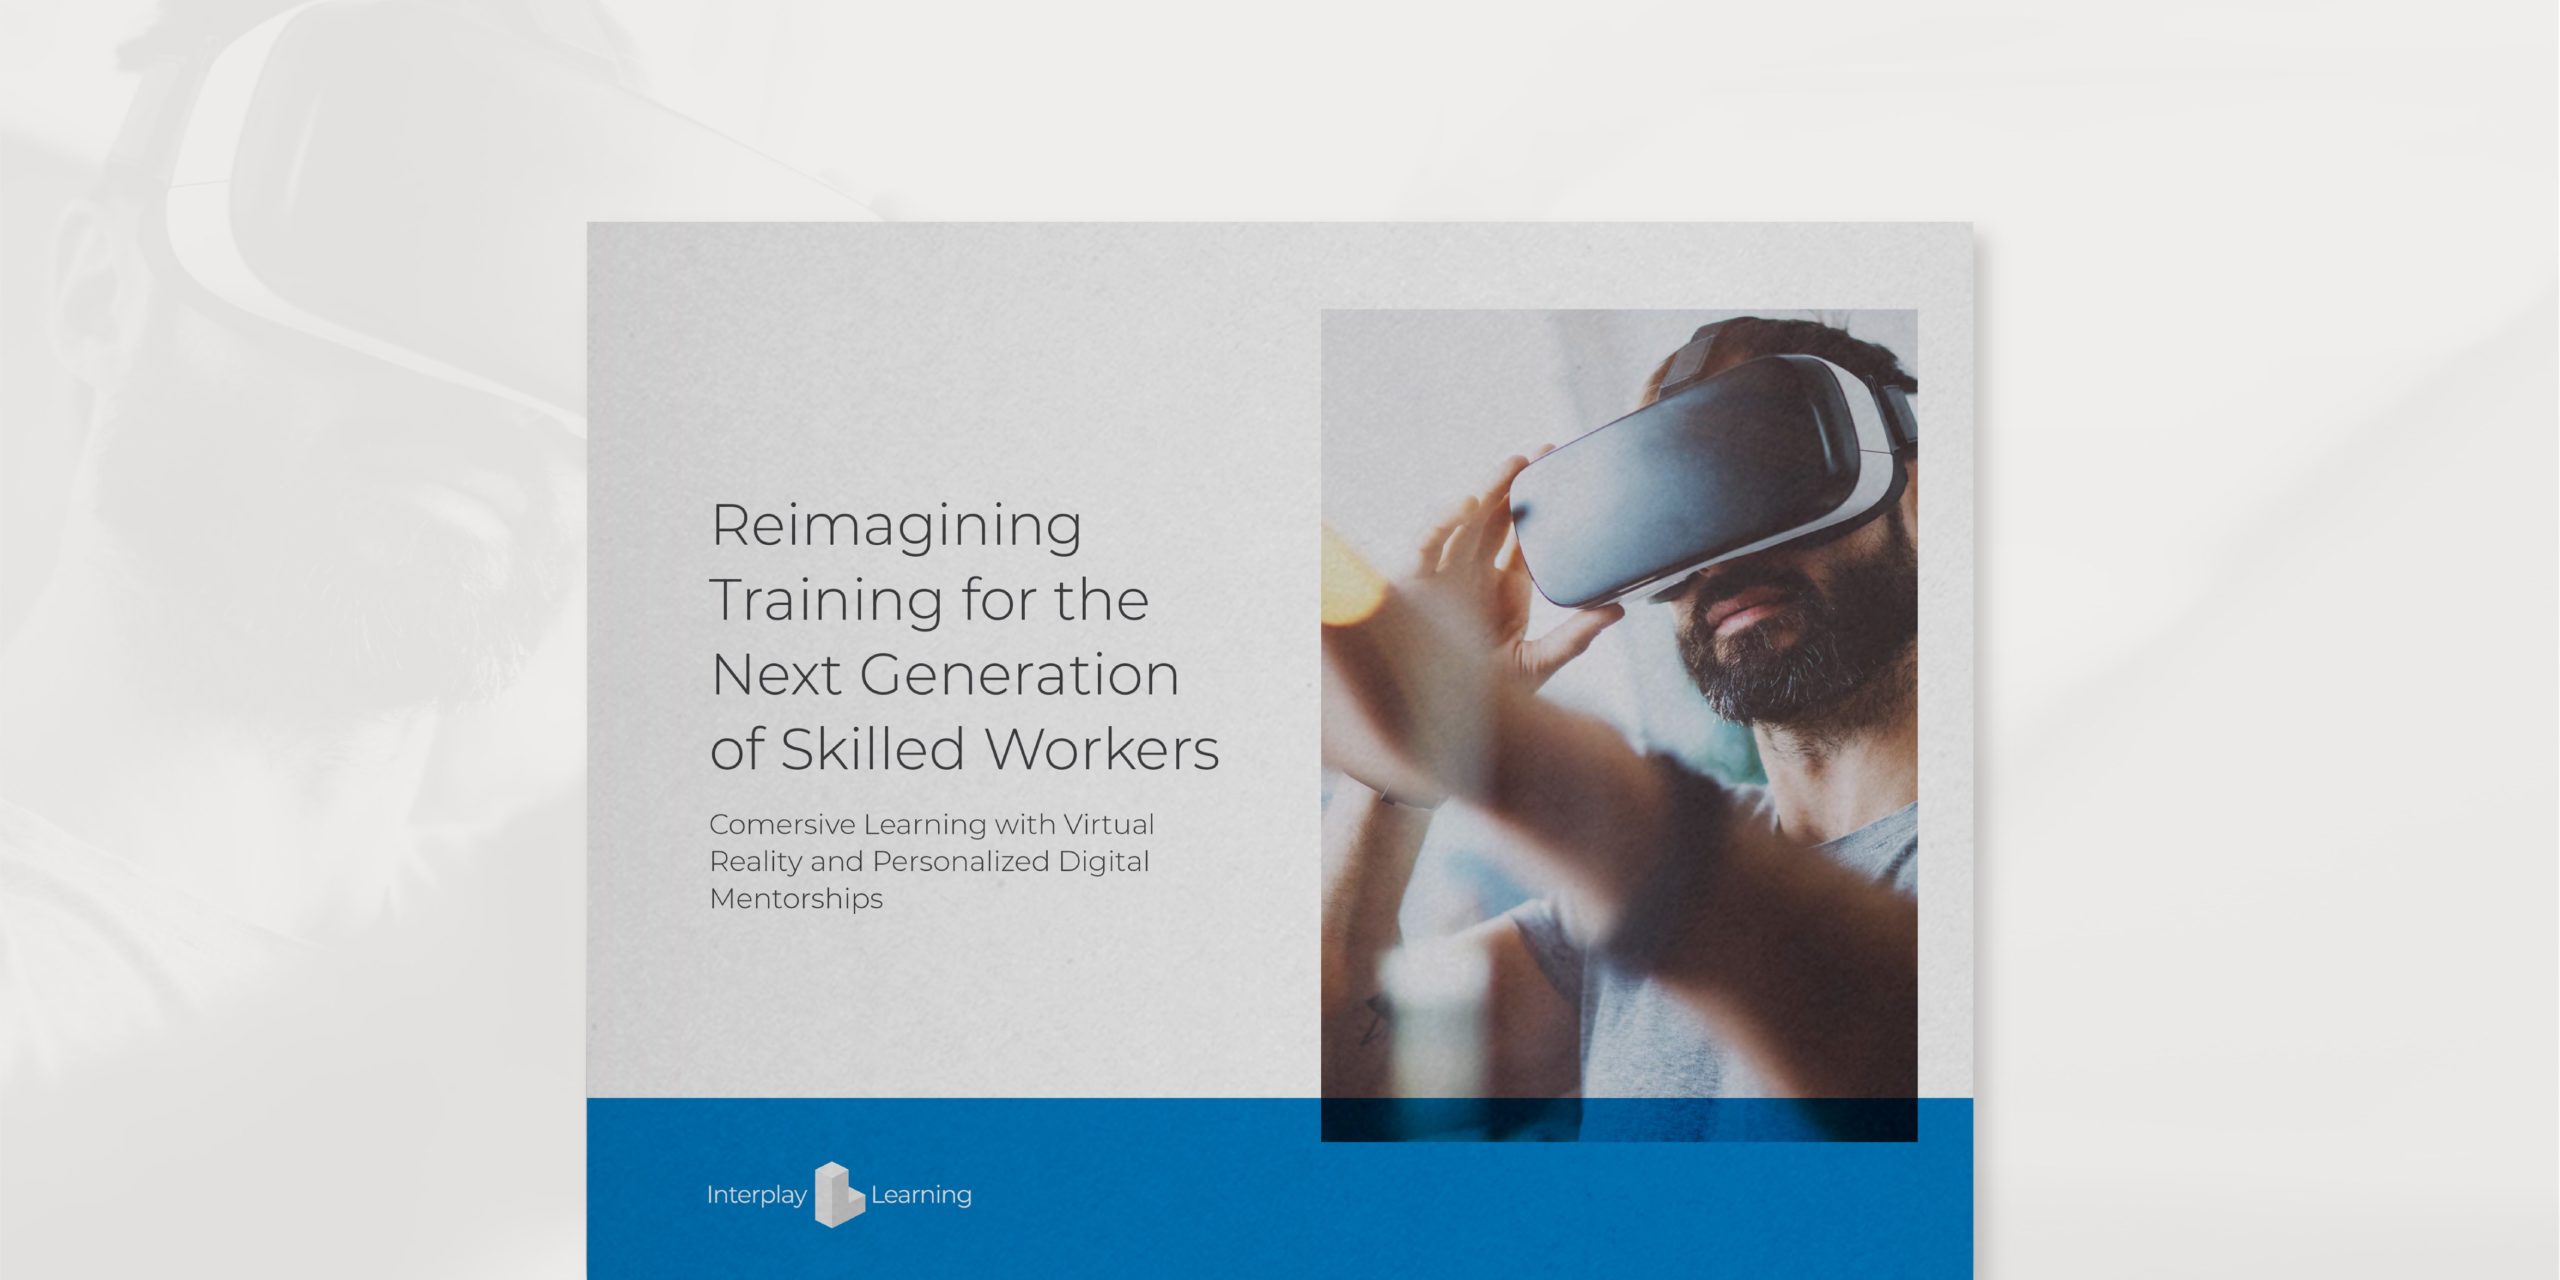 Reimagining Training for the Next Generation of Skilled Workers